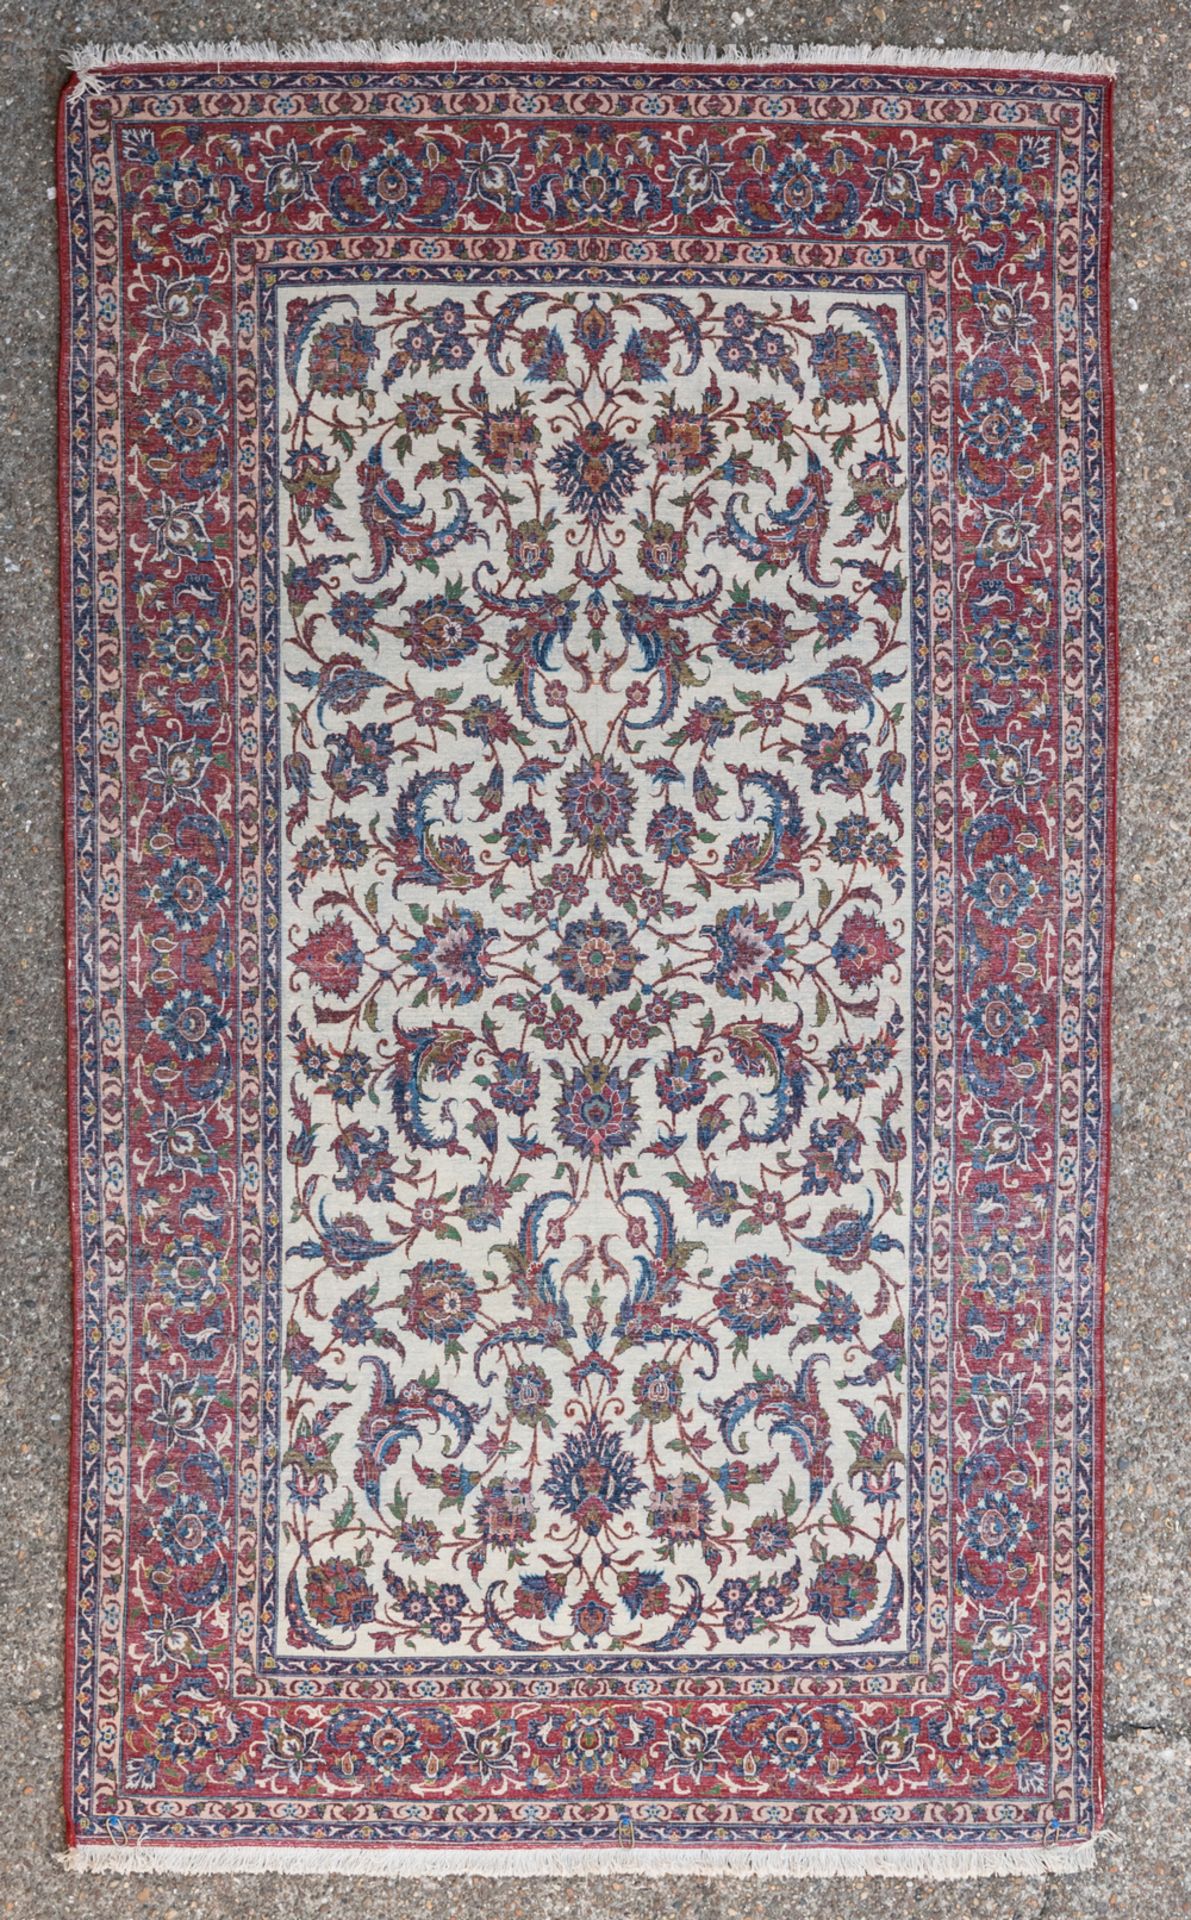 An Oriental rug with floral motifs, wool on cotton, 157 x 270 cm - Image 2 of 3